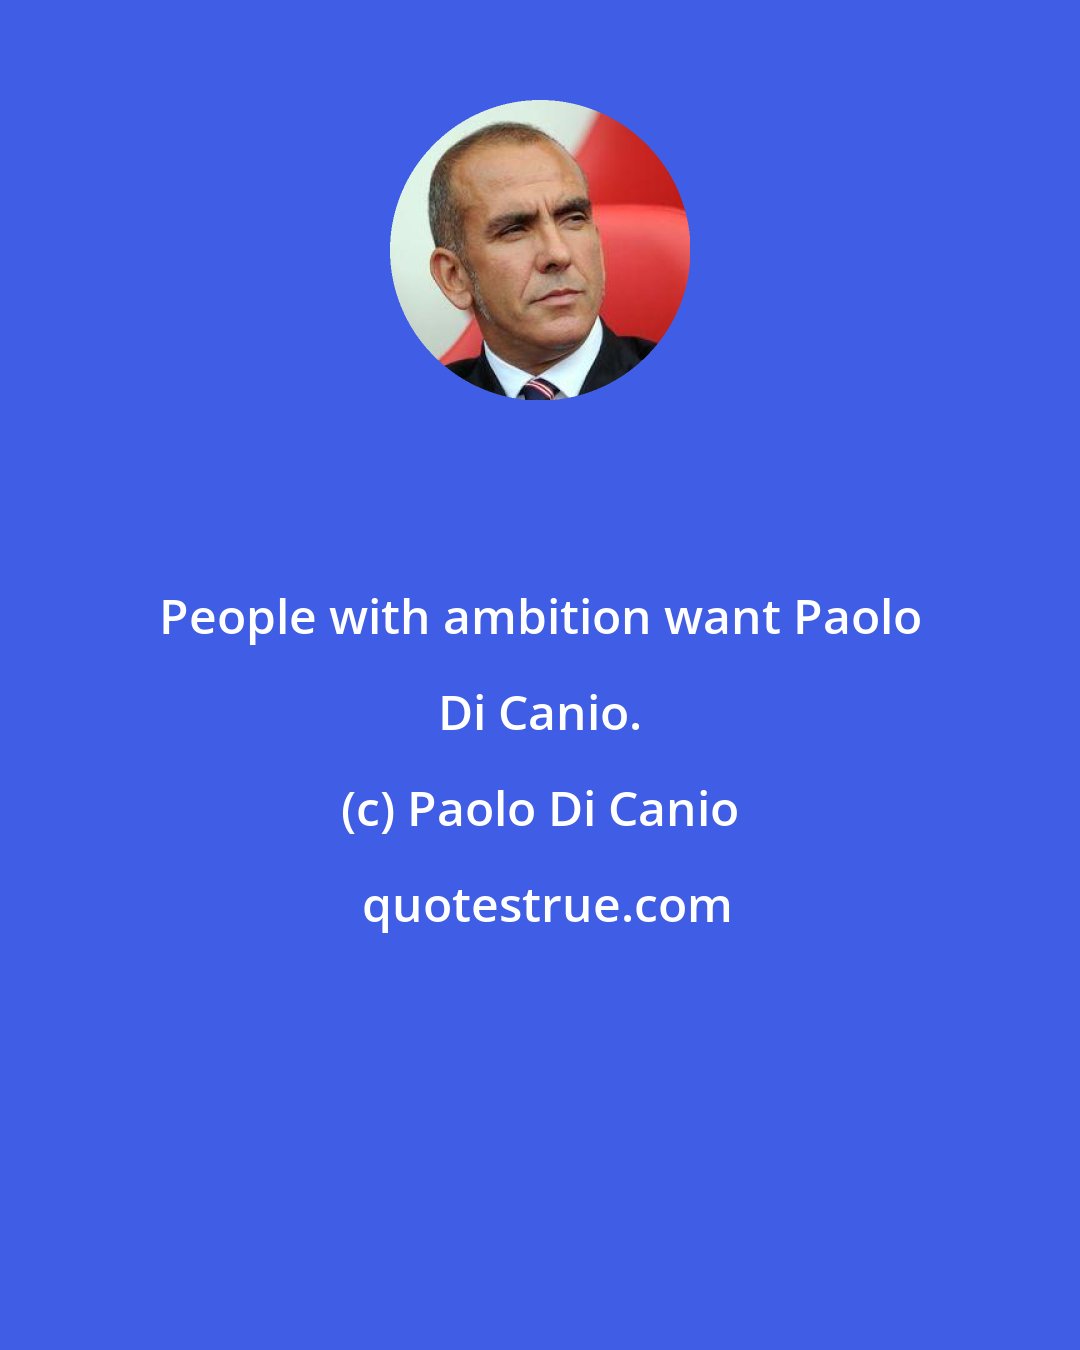 Paolo Di Canio: People with ambition want Paolo Di Canio.